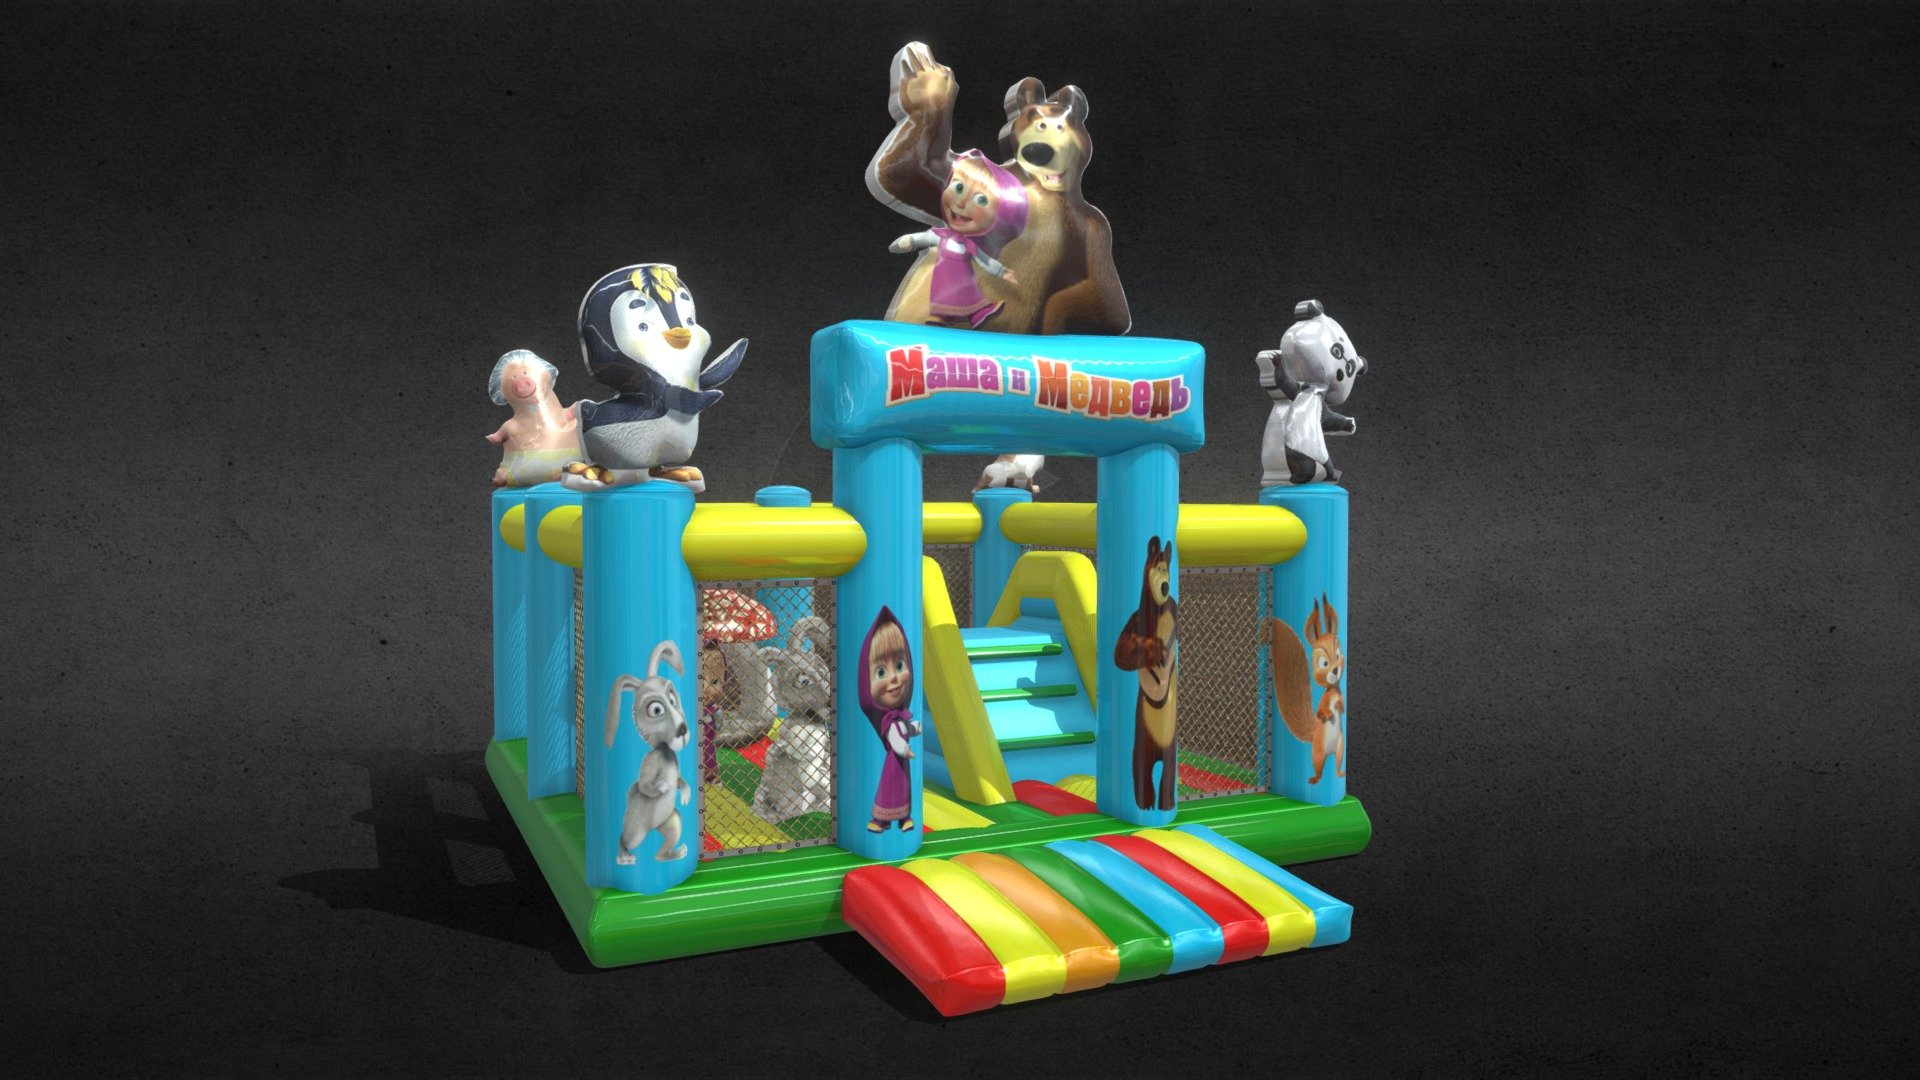 Children's Play Inflatable Complex (Masha and the Bear)

inflatable structure in the theme of popular cartoons (favorite Masha and the bear) for the entertainment of children under 12 years old 3d model